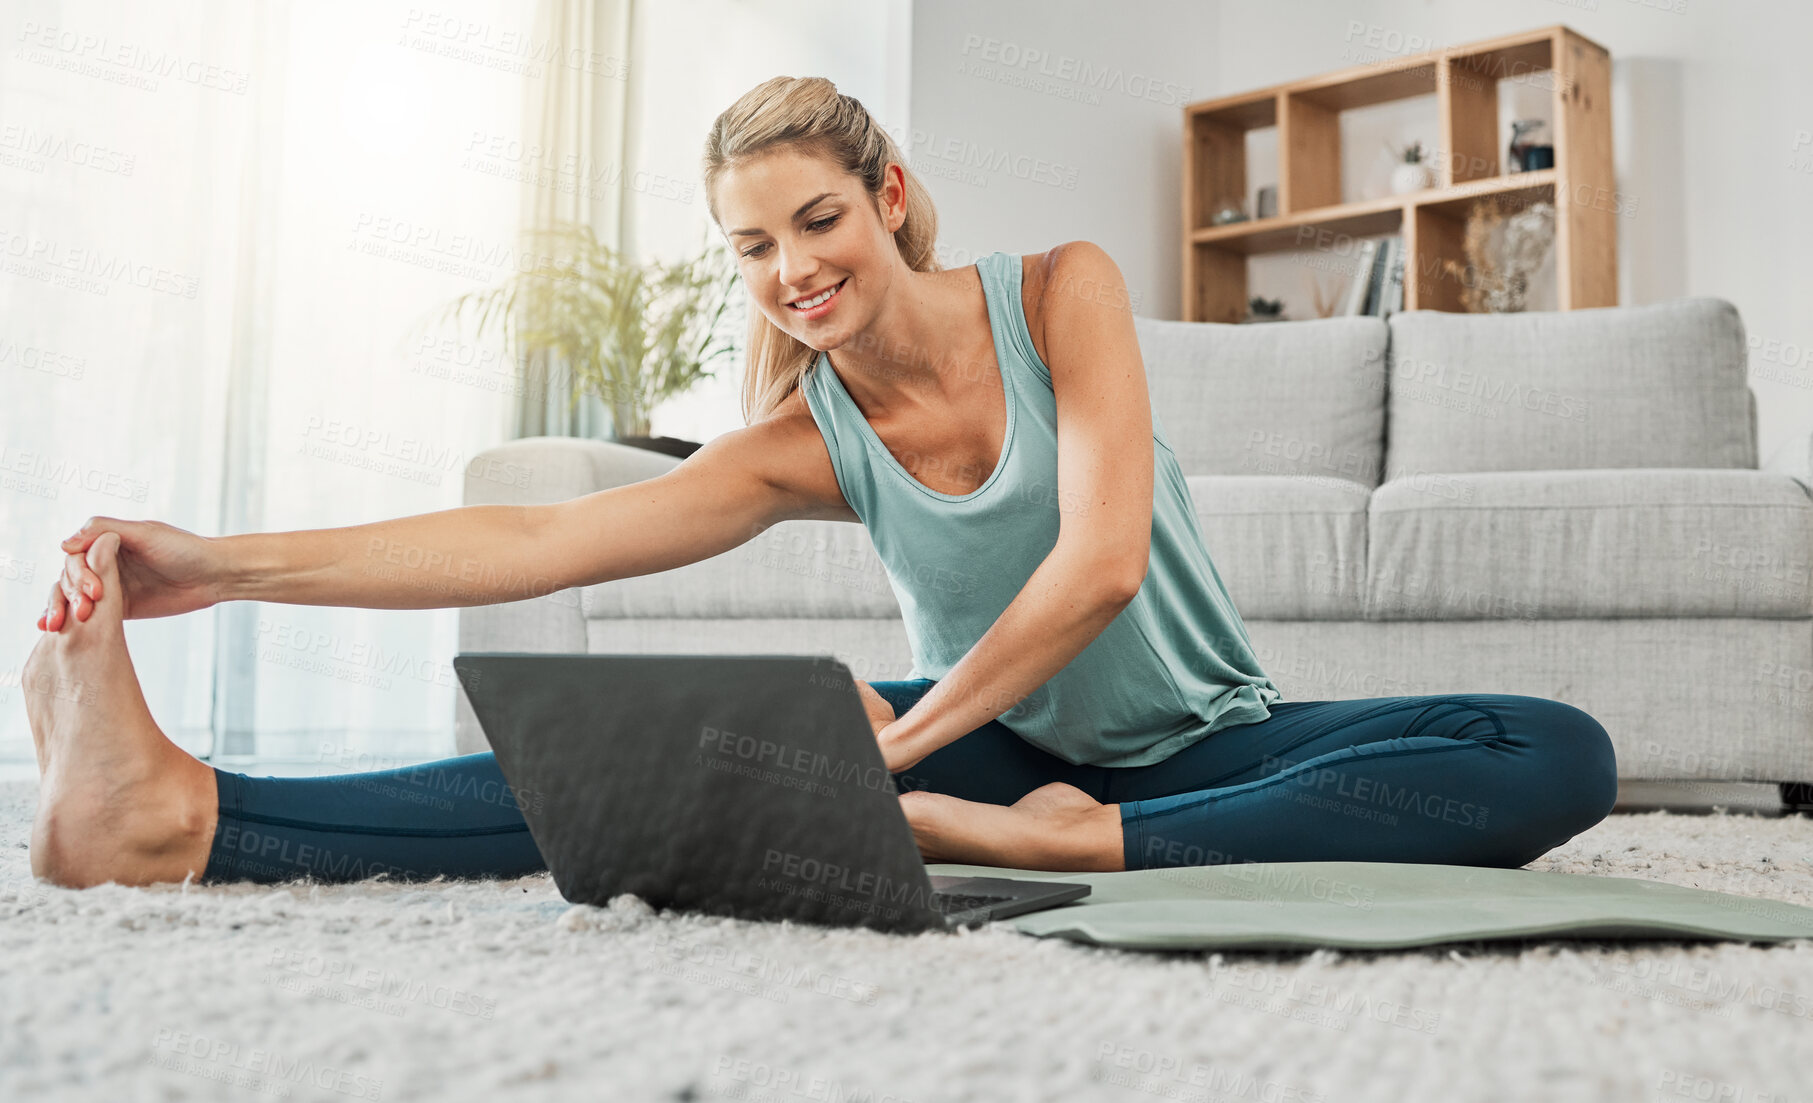 Buy stock photo Yoga, stretching and woman on laptop in home streaming training video, web yoga class or tutorial. Zen, health and young female on tech pc, pilates mat and exercise, fitness and wellness workout.
